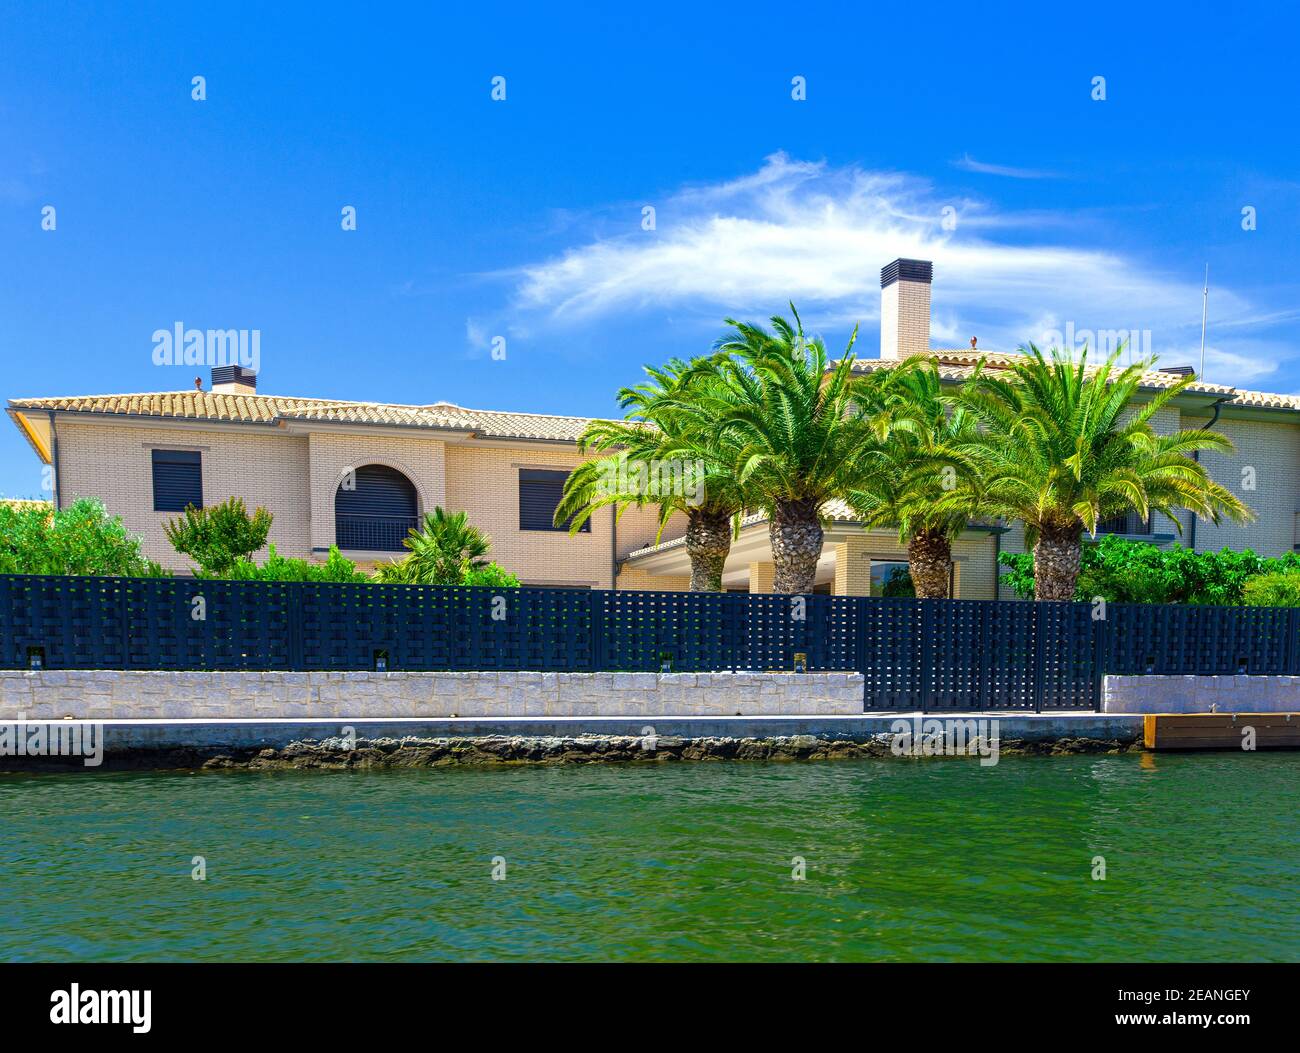 house with palm by the water at the resort in Spain Stock Photo